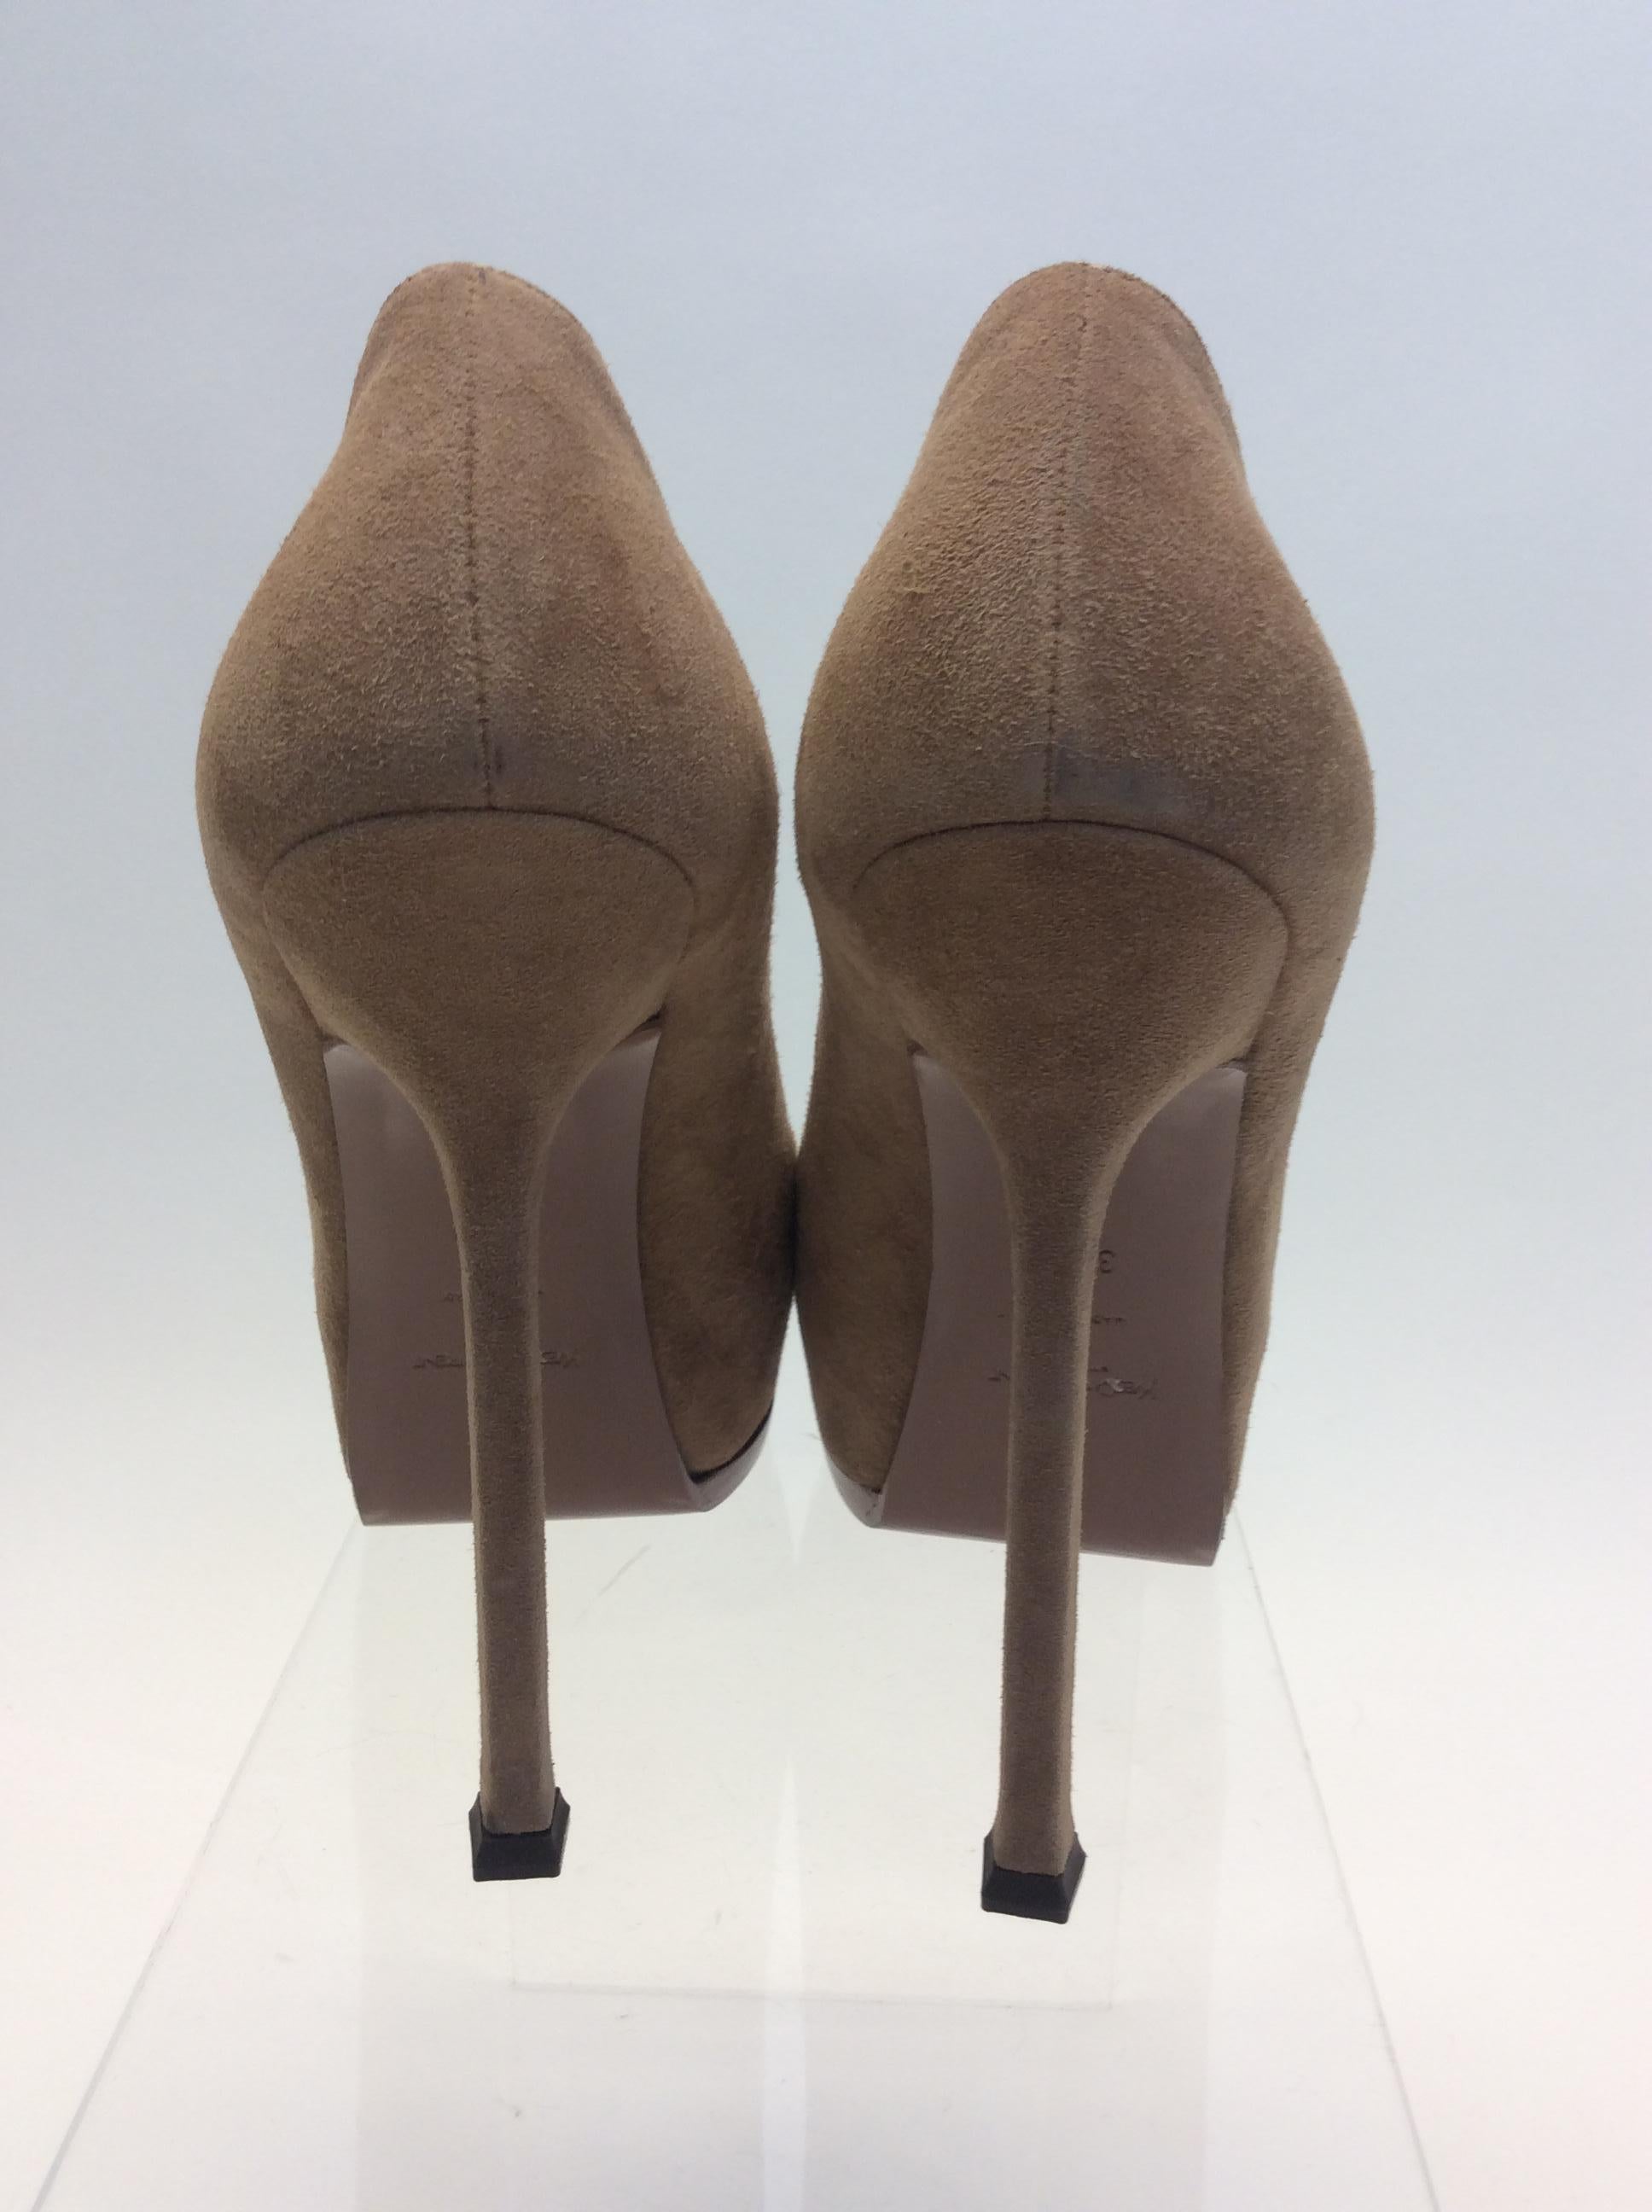 Yves Saint Laurent Nude Suede and Patent Leather Heels  im Zustand „Neu“ im Angebot in Narberth, PA